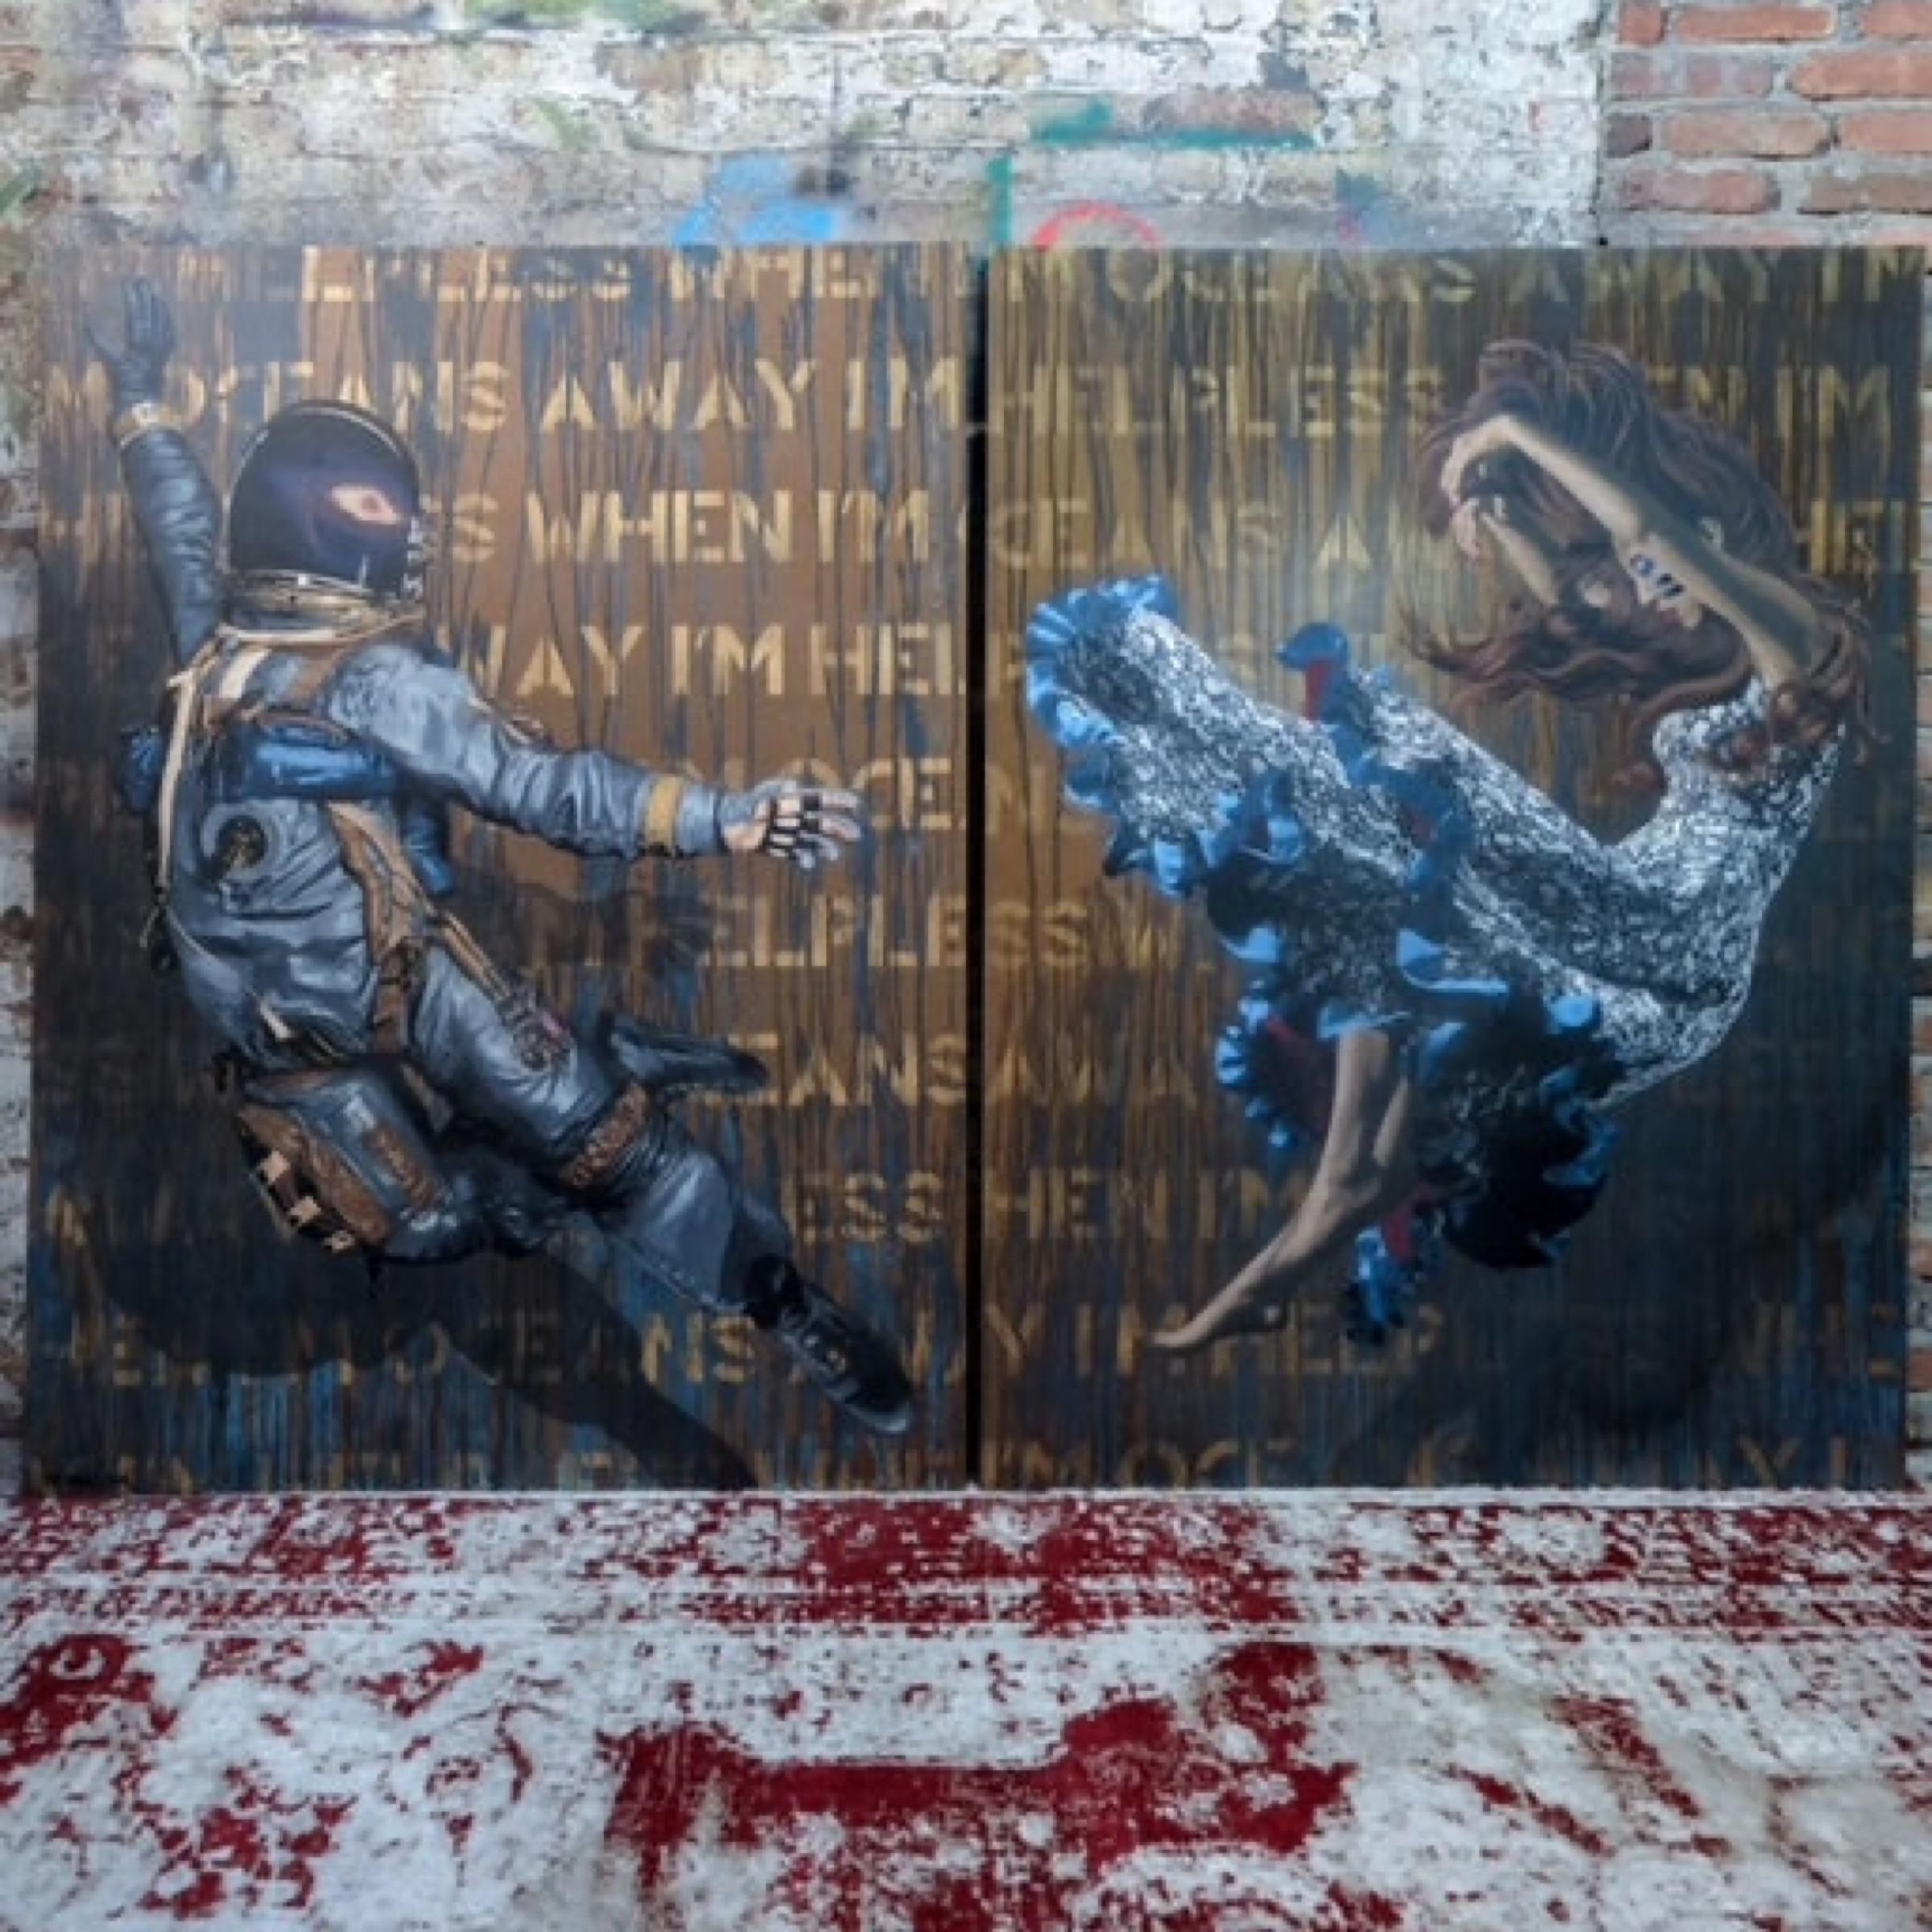 Spray Paint and Bronze Patina on Wood Panel Framed

62.25 x 47.25 each 